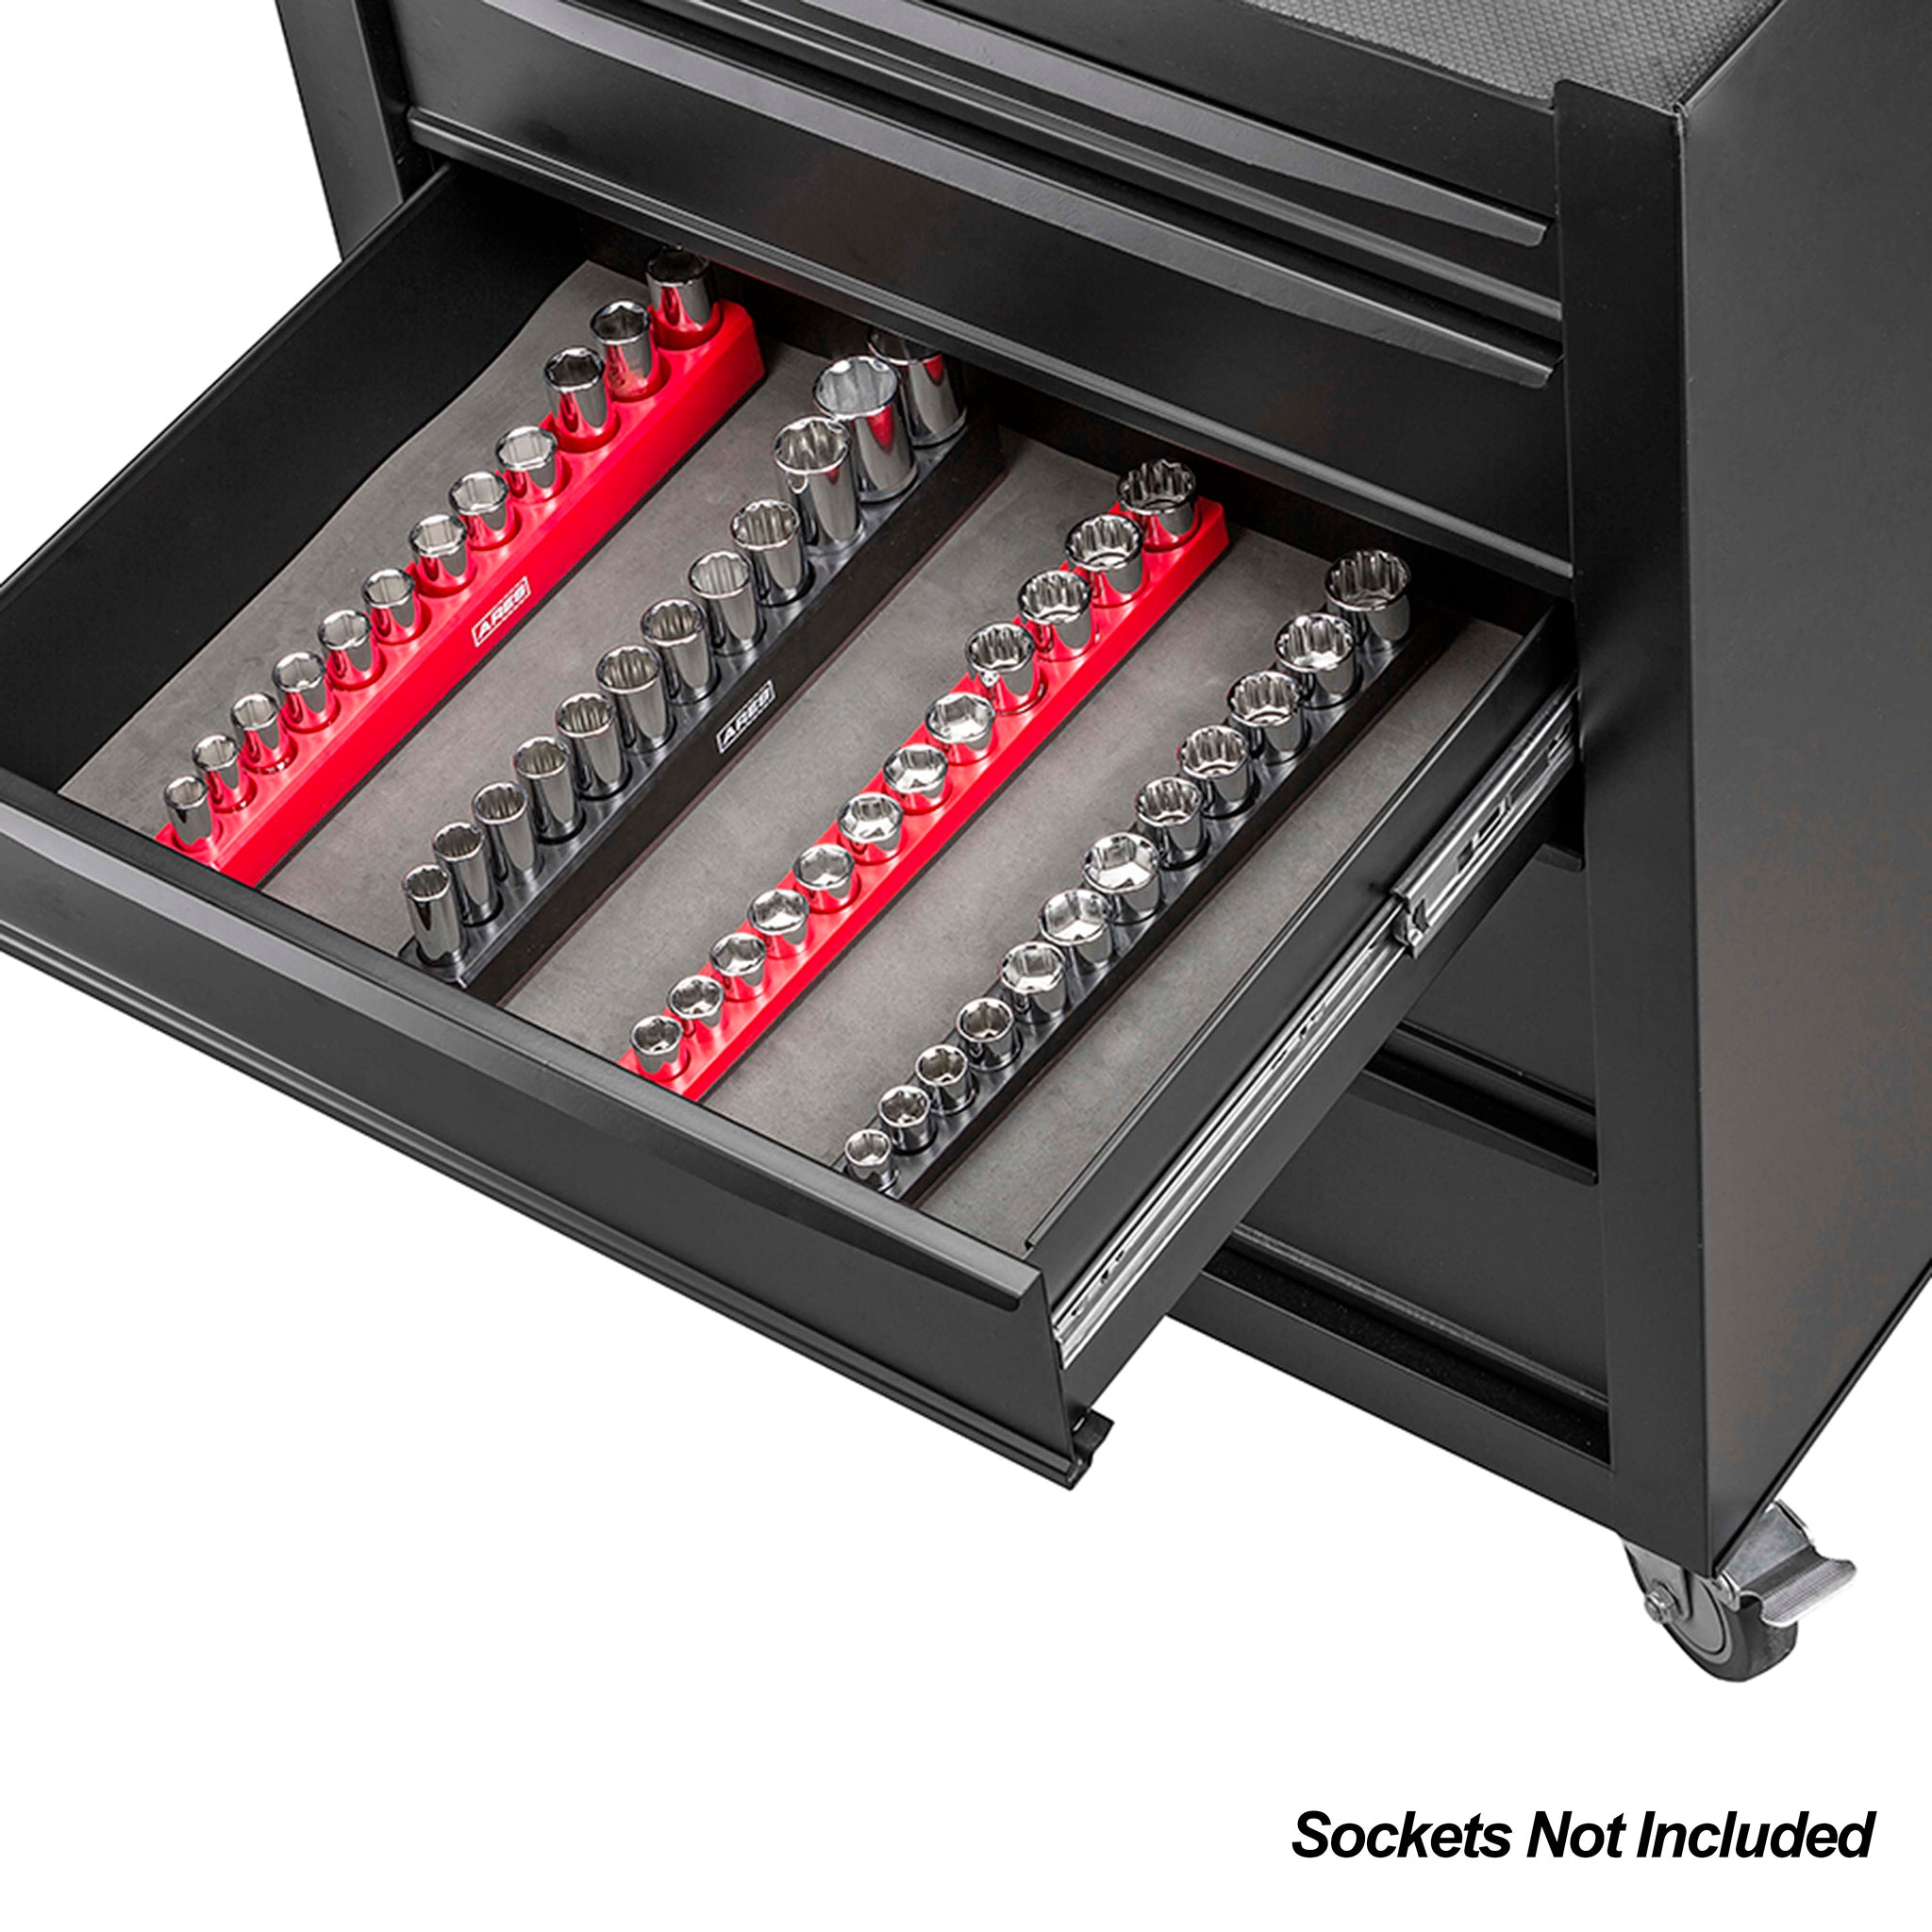 3/8 Drive SAE Standard Socket Holder Magnetic Tool Organizer Tray - Red,  Holds 13 Regular and 13 Deep Size Sockets - Bed Bath & Beyond - 30343215